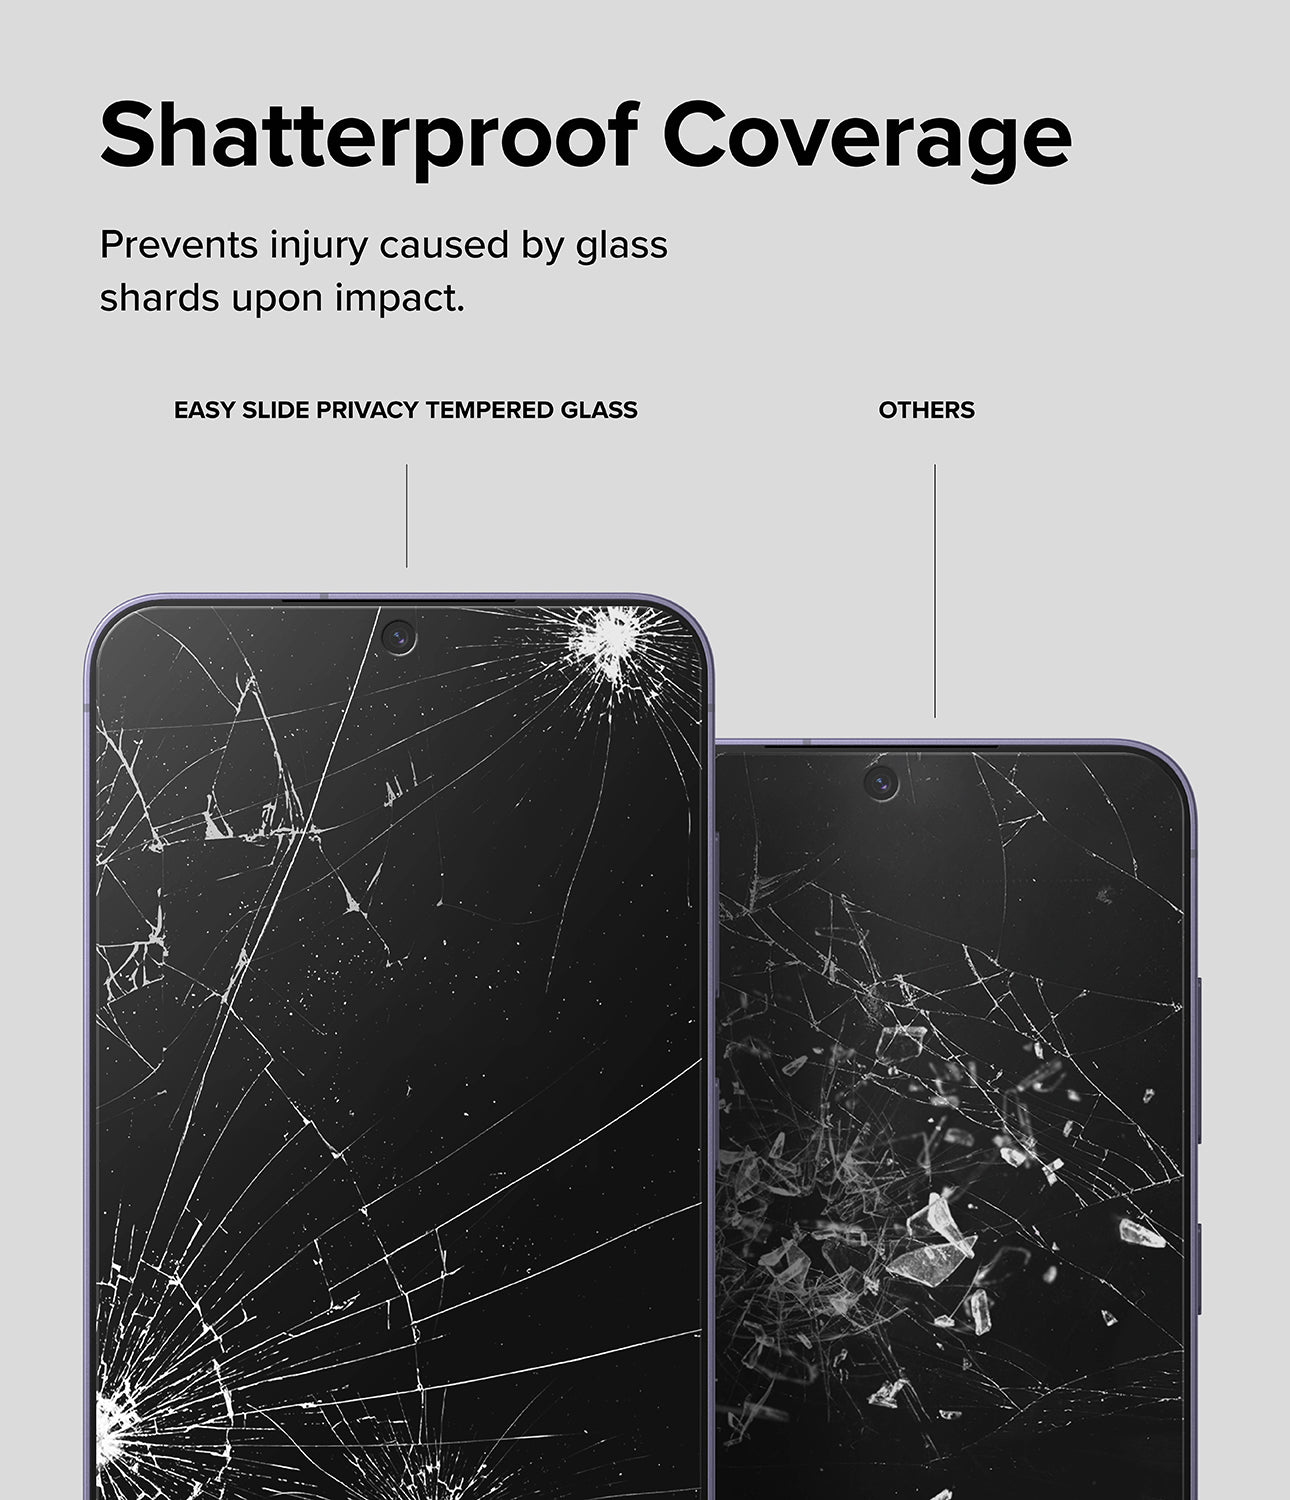 Galaxy S24 Plus Screen Protector | Easy Slide Privacy Tempered Glass - Shatterproof Coverage. Prevents injury caused by glass shards upon impact.